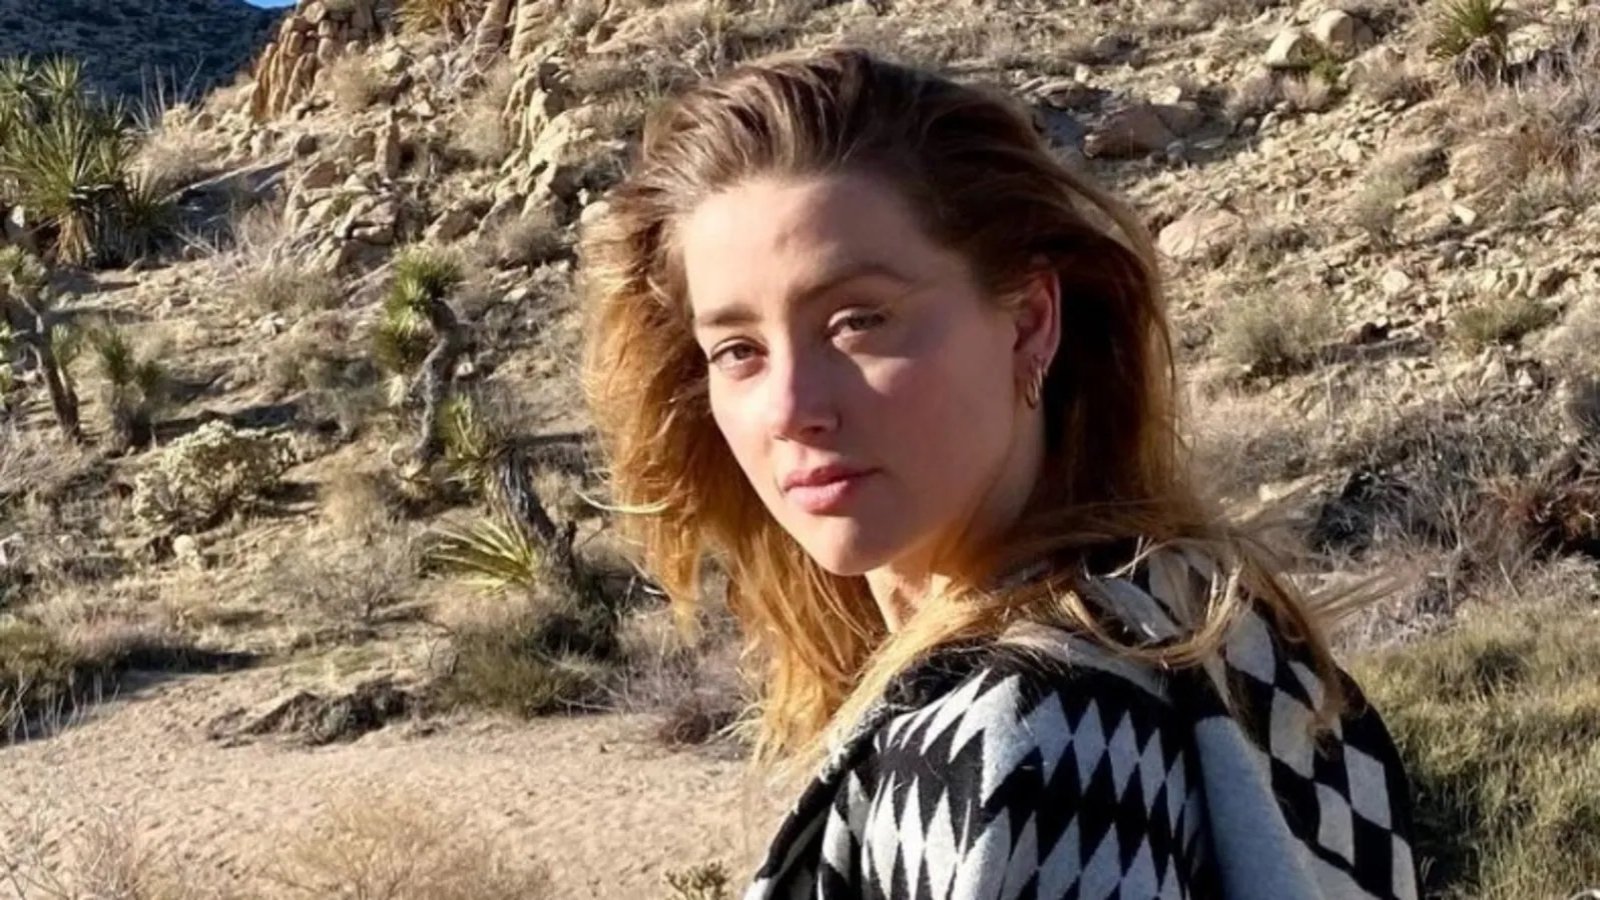 Amber Heard leaves Hollywood and moves to Madrid with her daughter